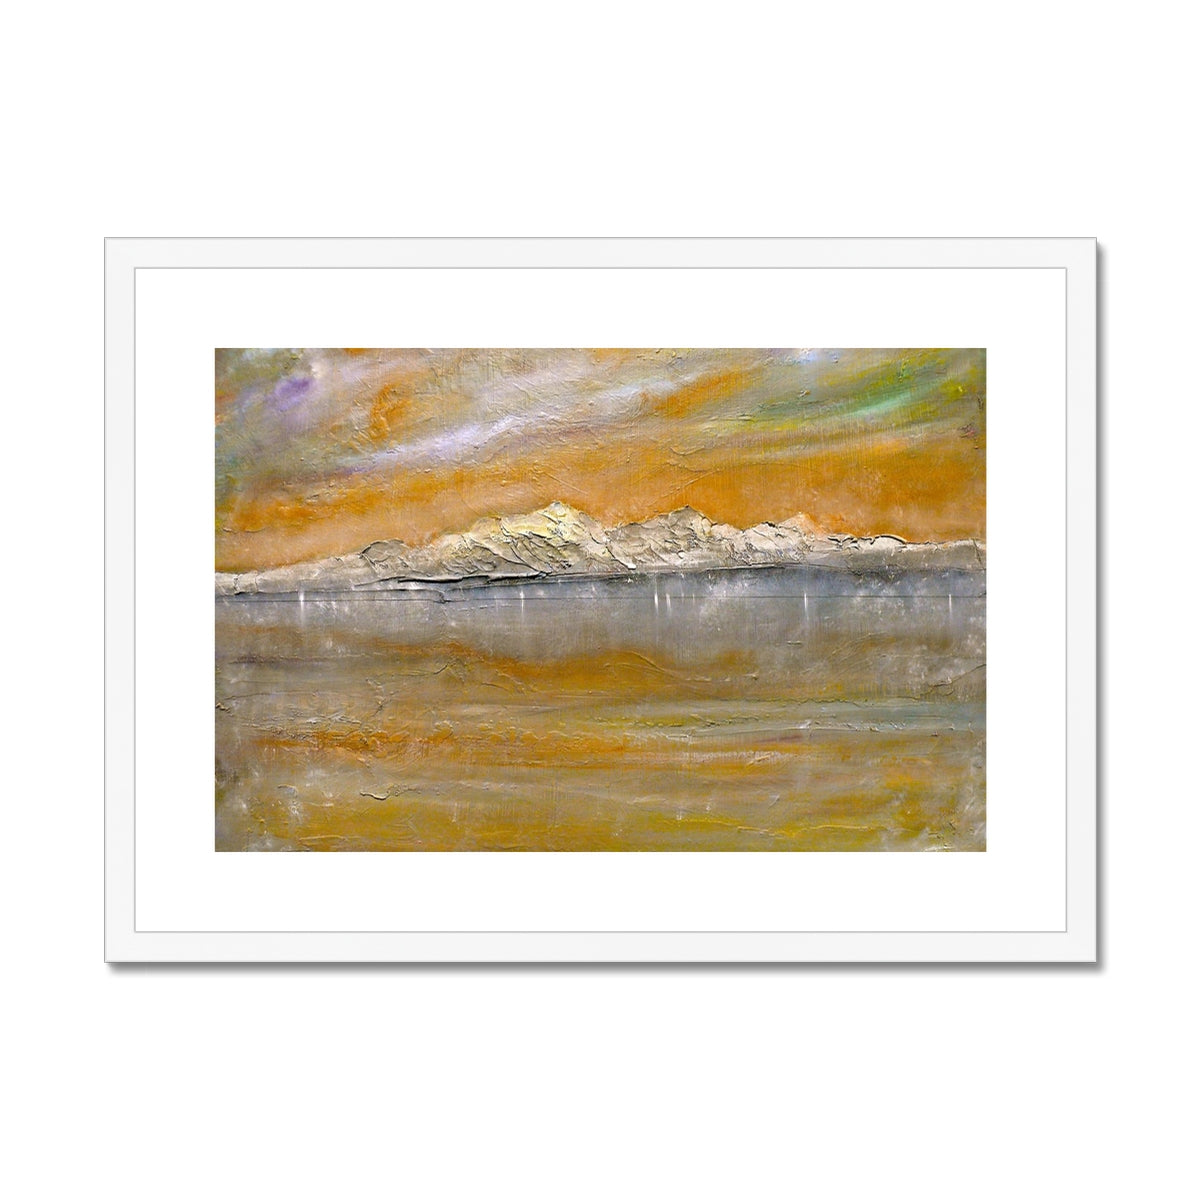 Arran Snow Painting | Framed & Mounted Prints From Scotland-Framed & Mounted Prints-Arran Art Gallery-A2 Landscape-White Frame-Paintings, Prints, Homeware, Art Gifts From Scotland By Scottish Artist Kevin Hunter